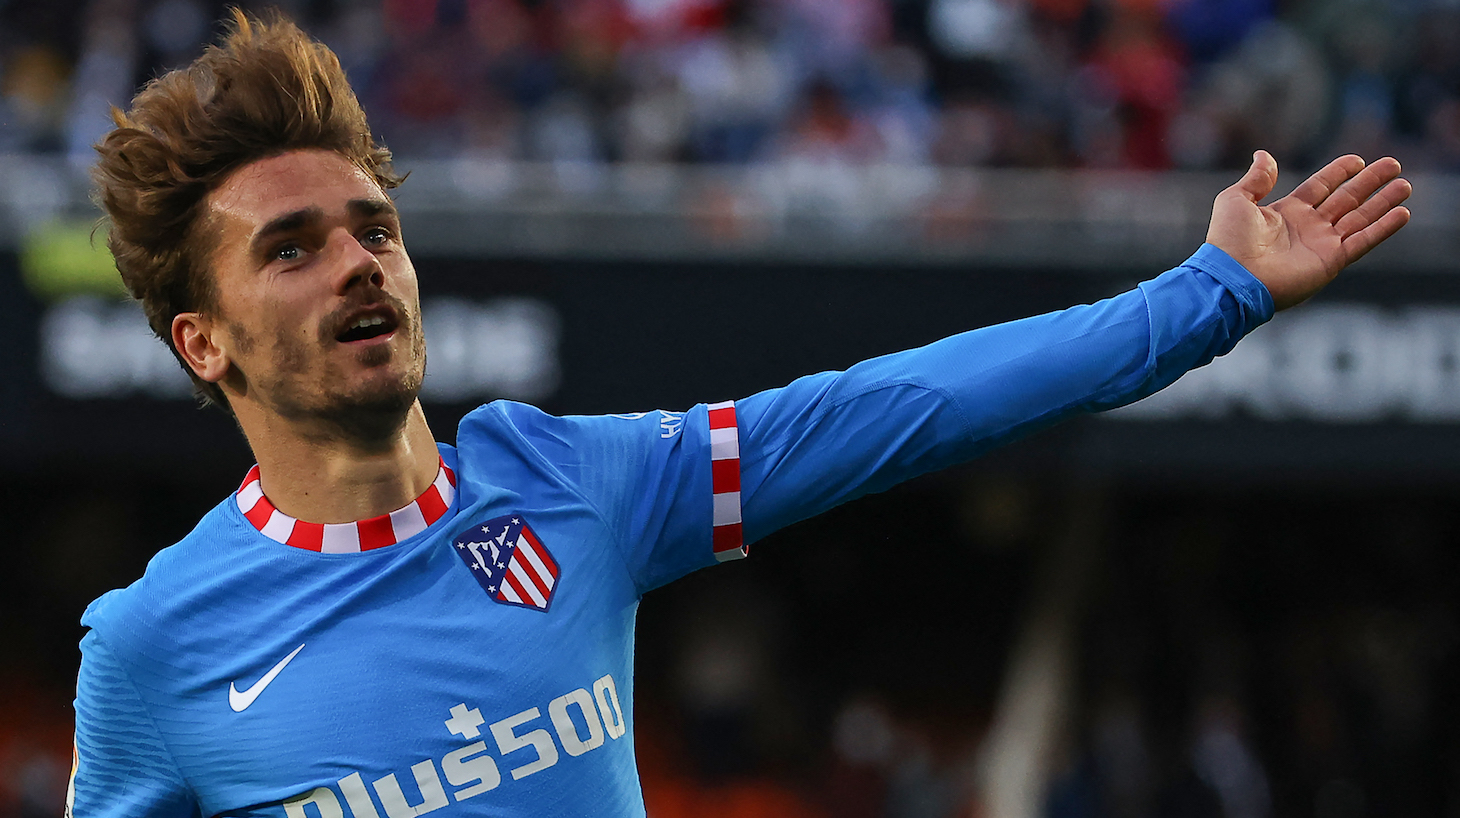 Atletico Madrid's French forward Antoine Griezmann celebrates after scoring his team's second goal during the Spanish league football match between Valencia CF and Club Atletico de Madrid at the Mestalla stadium in Valencia on November 7, 2021.